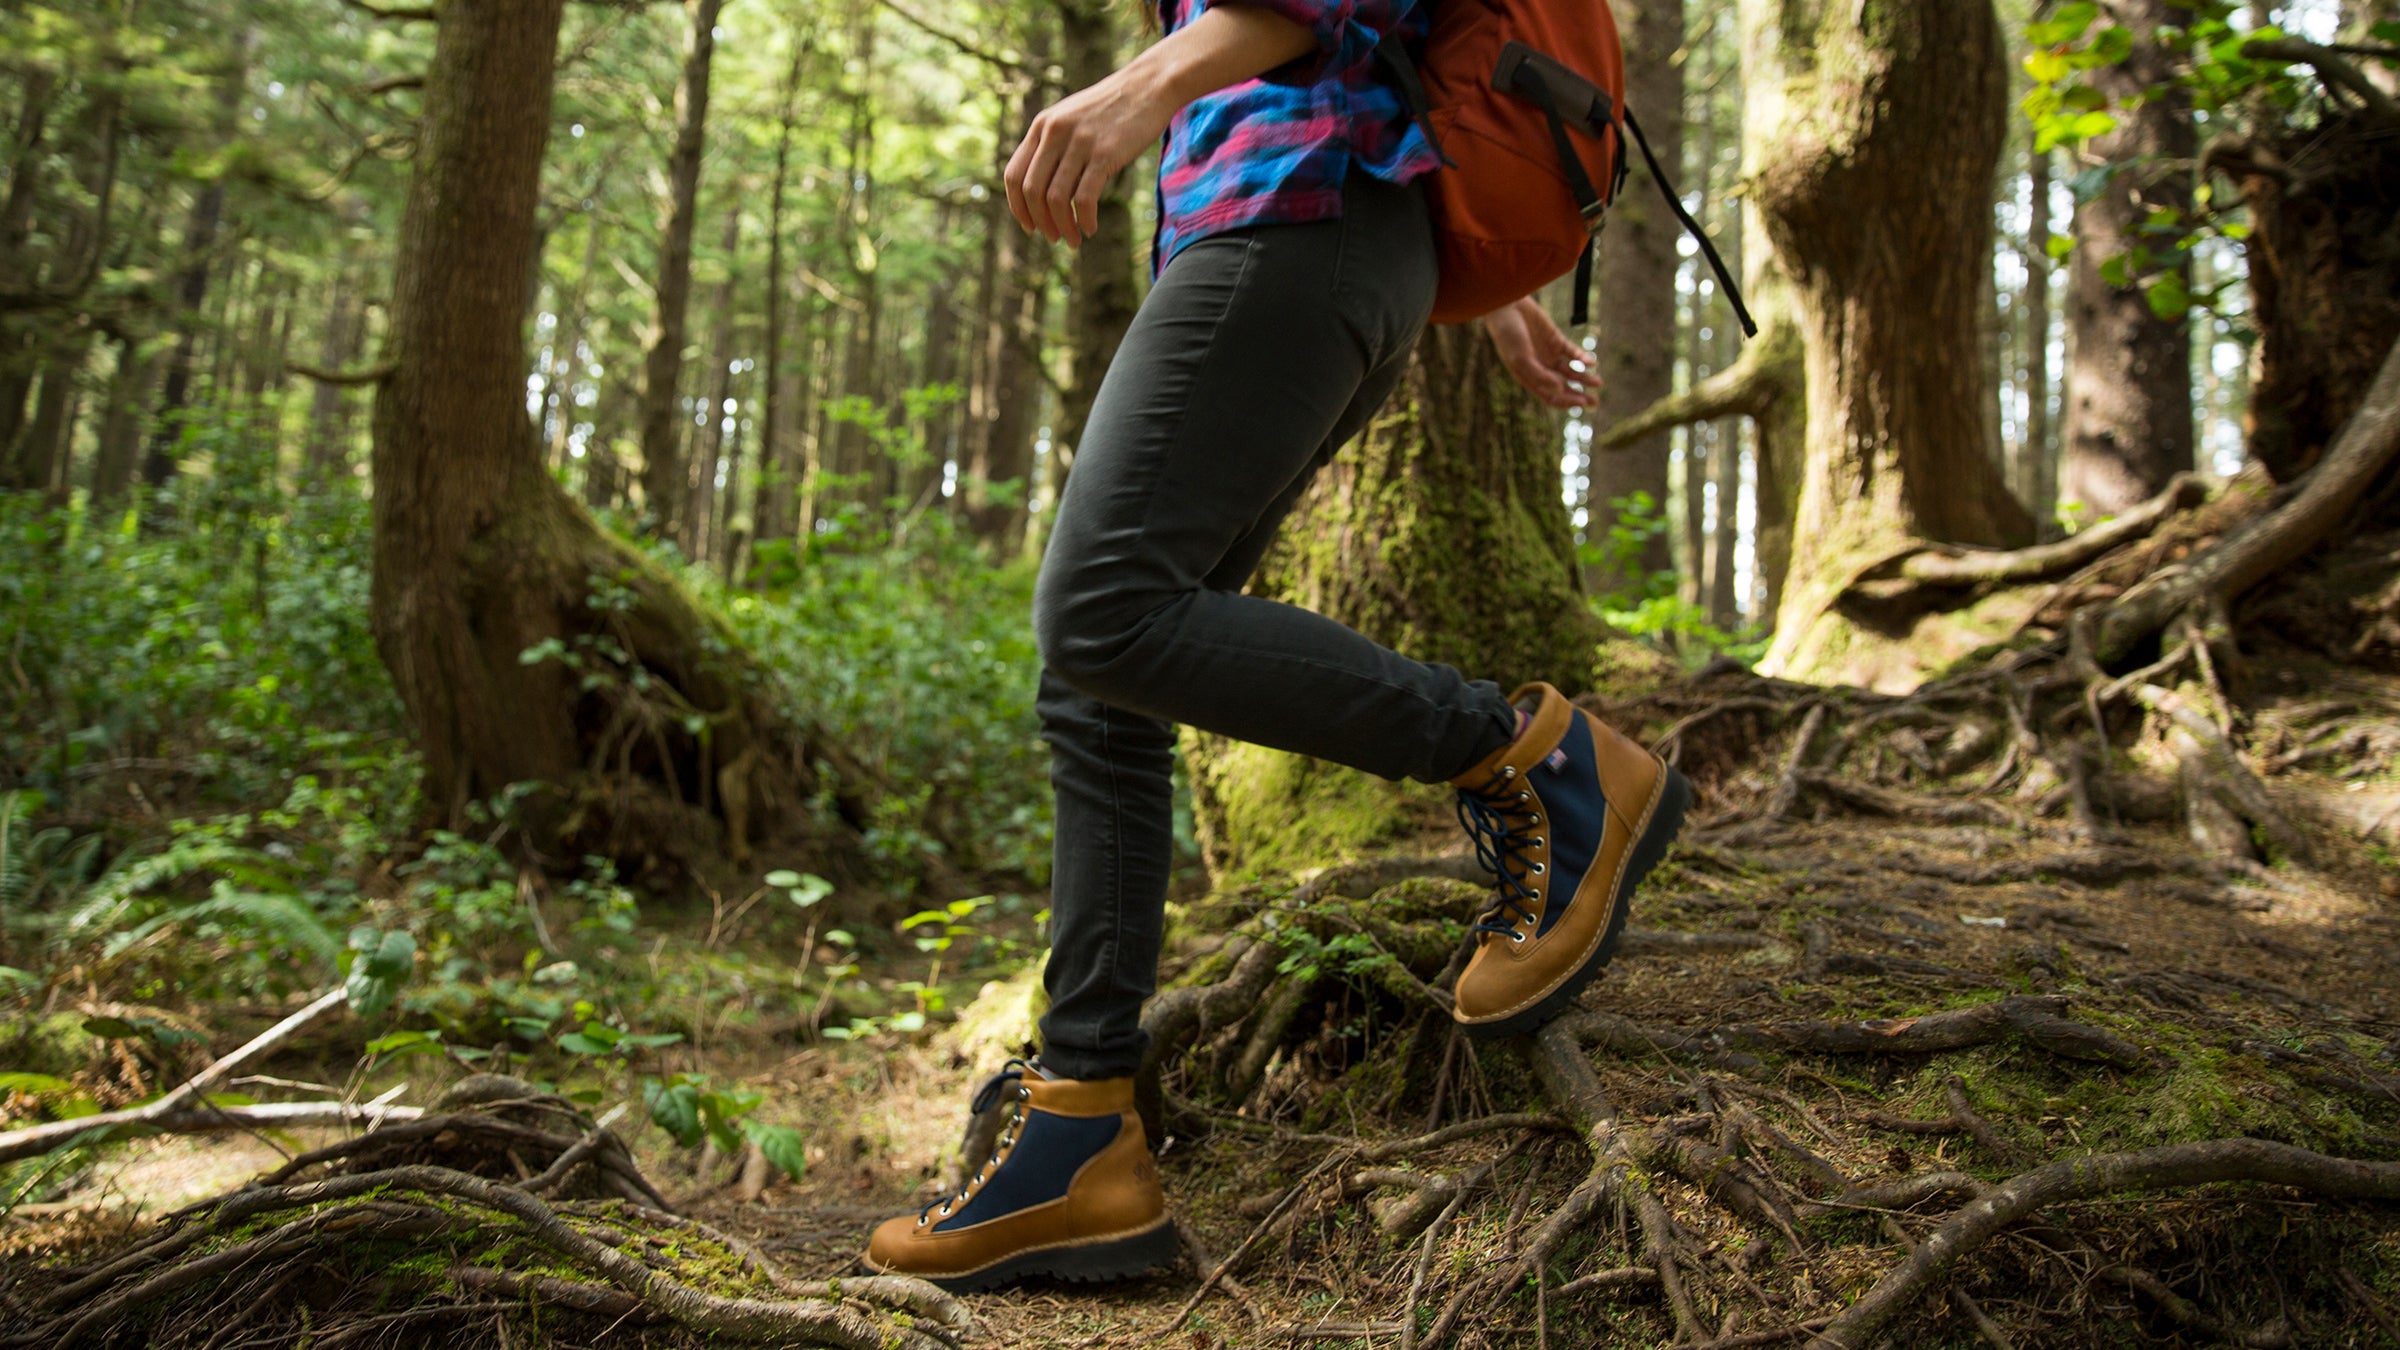 https://cdn.backpacker.com/wp-content/uploads/2021/03/hiker-on-trail-with-leather-boots.jpg